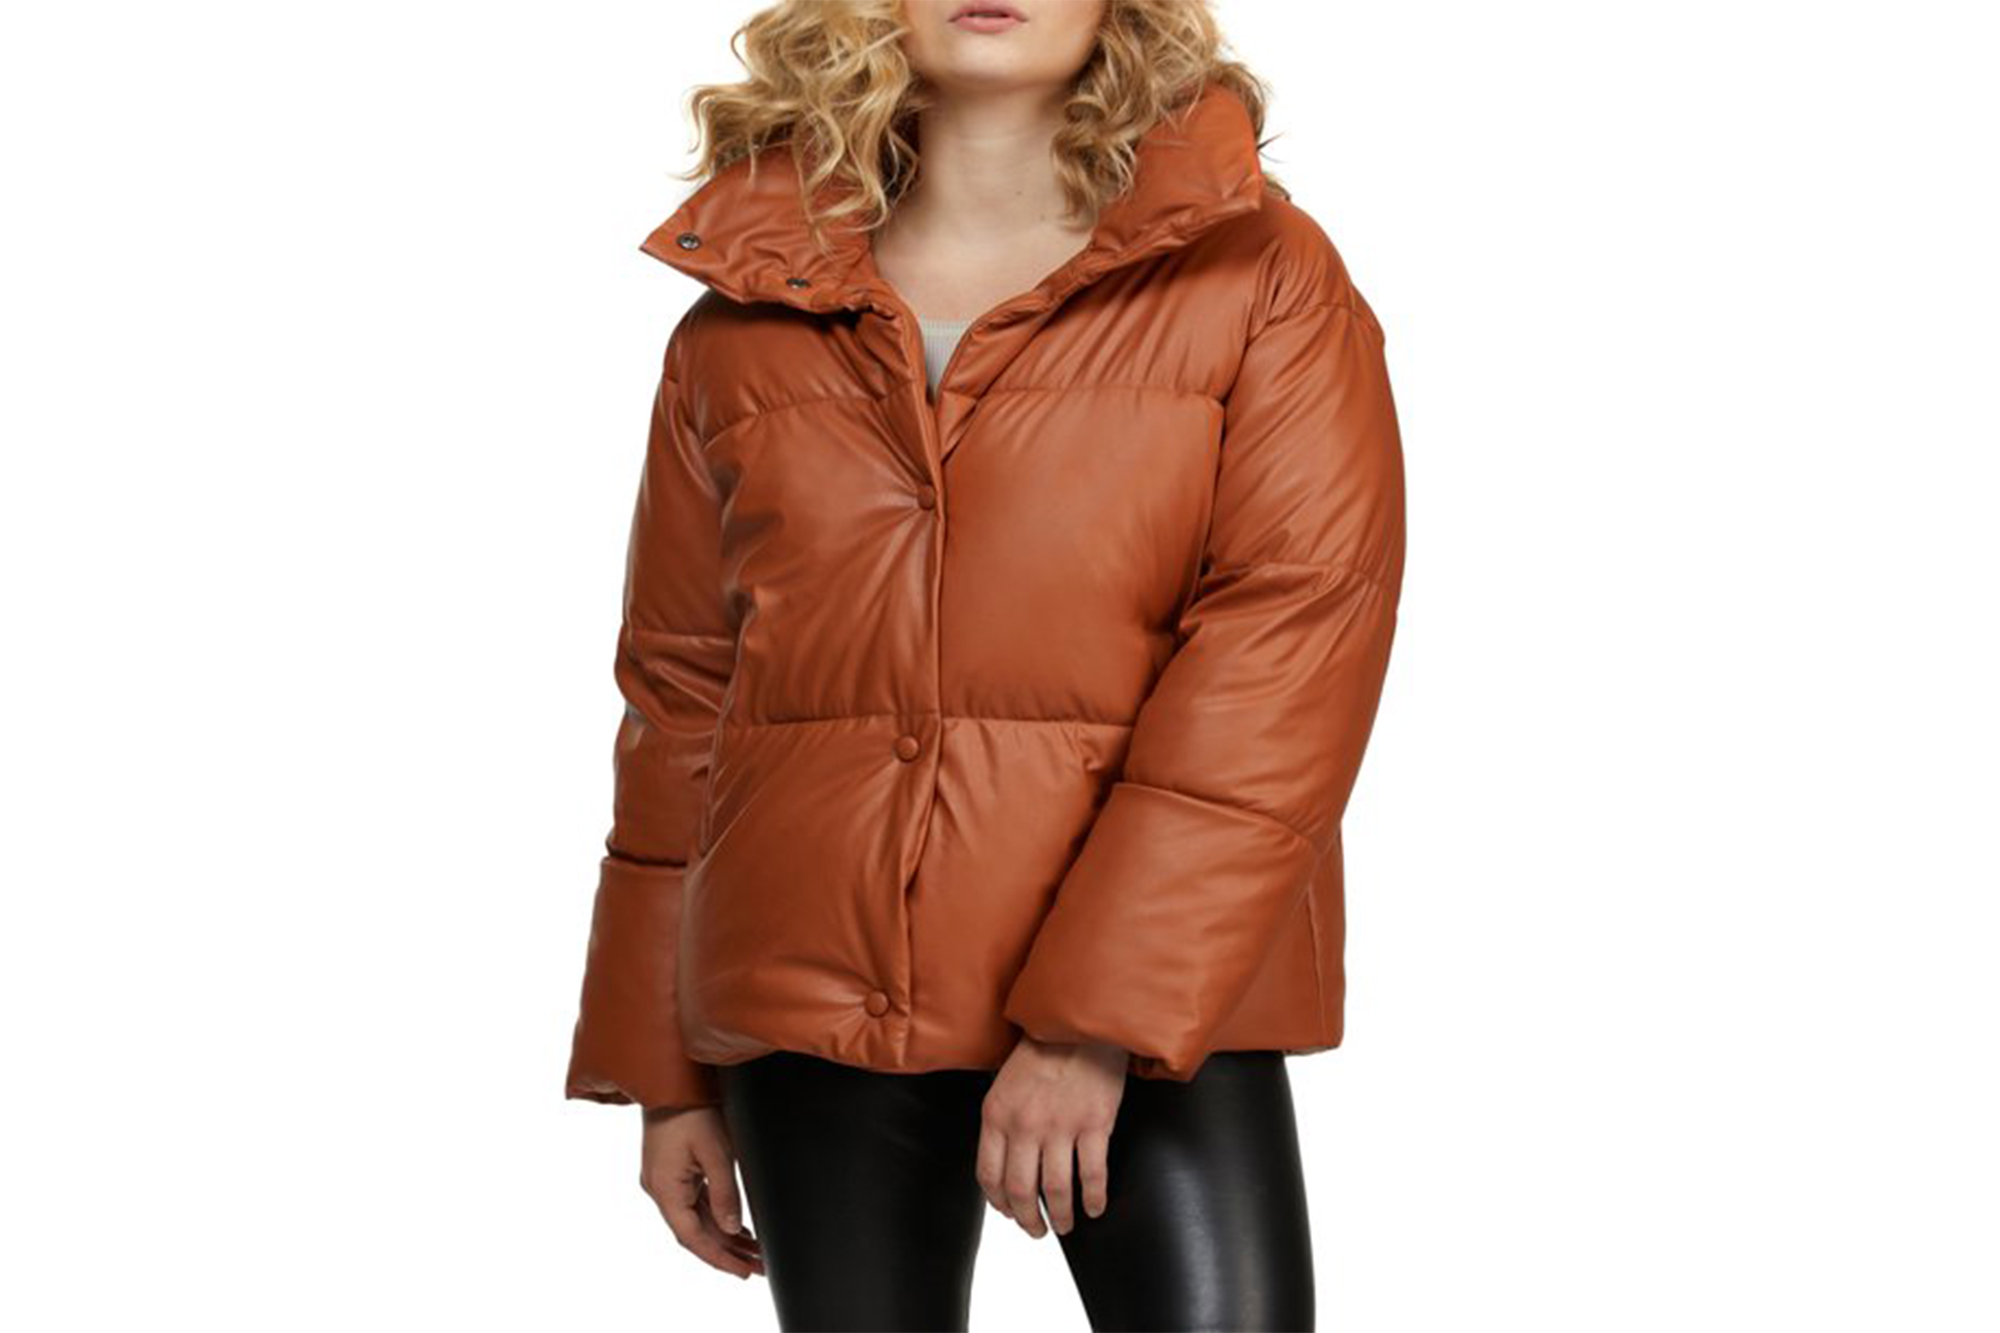 NVLT Quilted Faux Fur Jacket